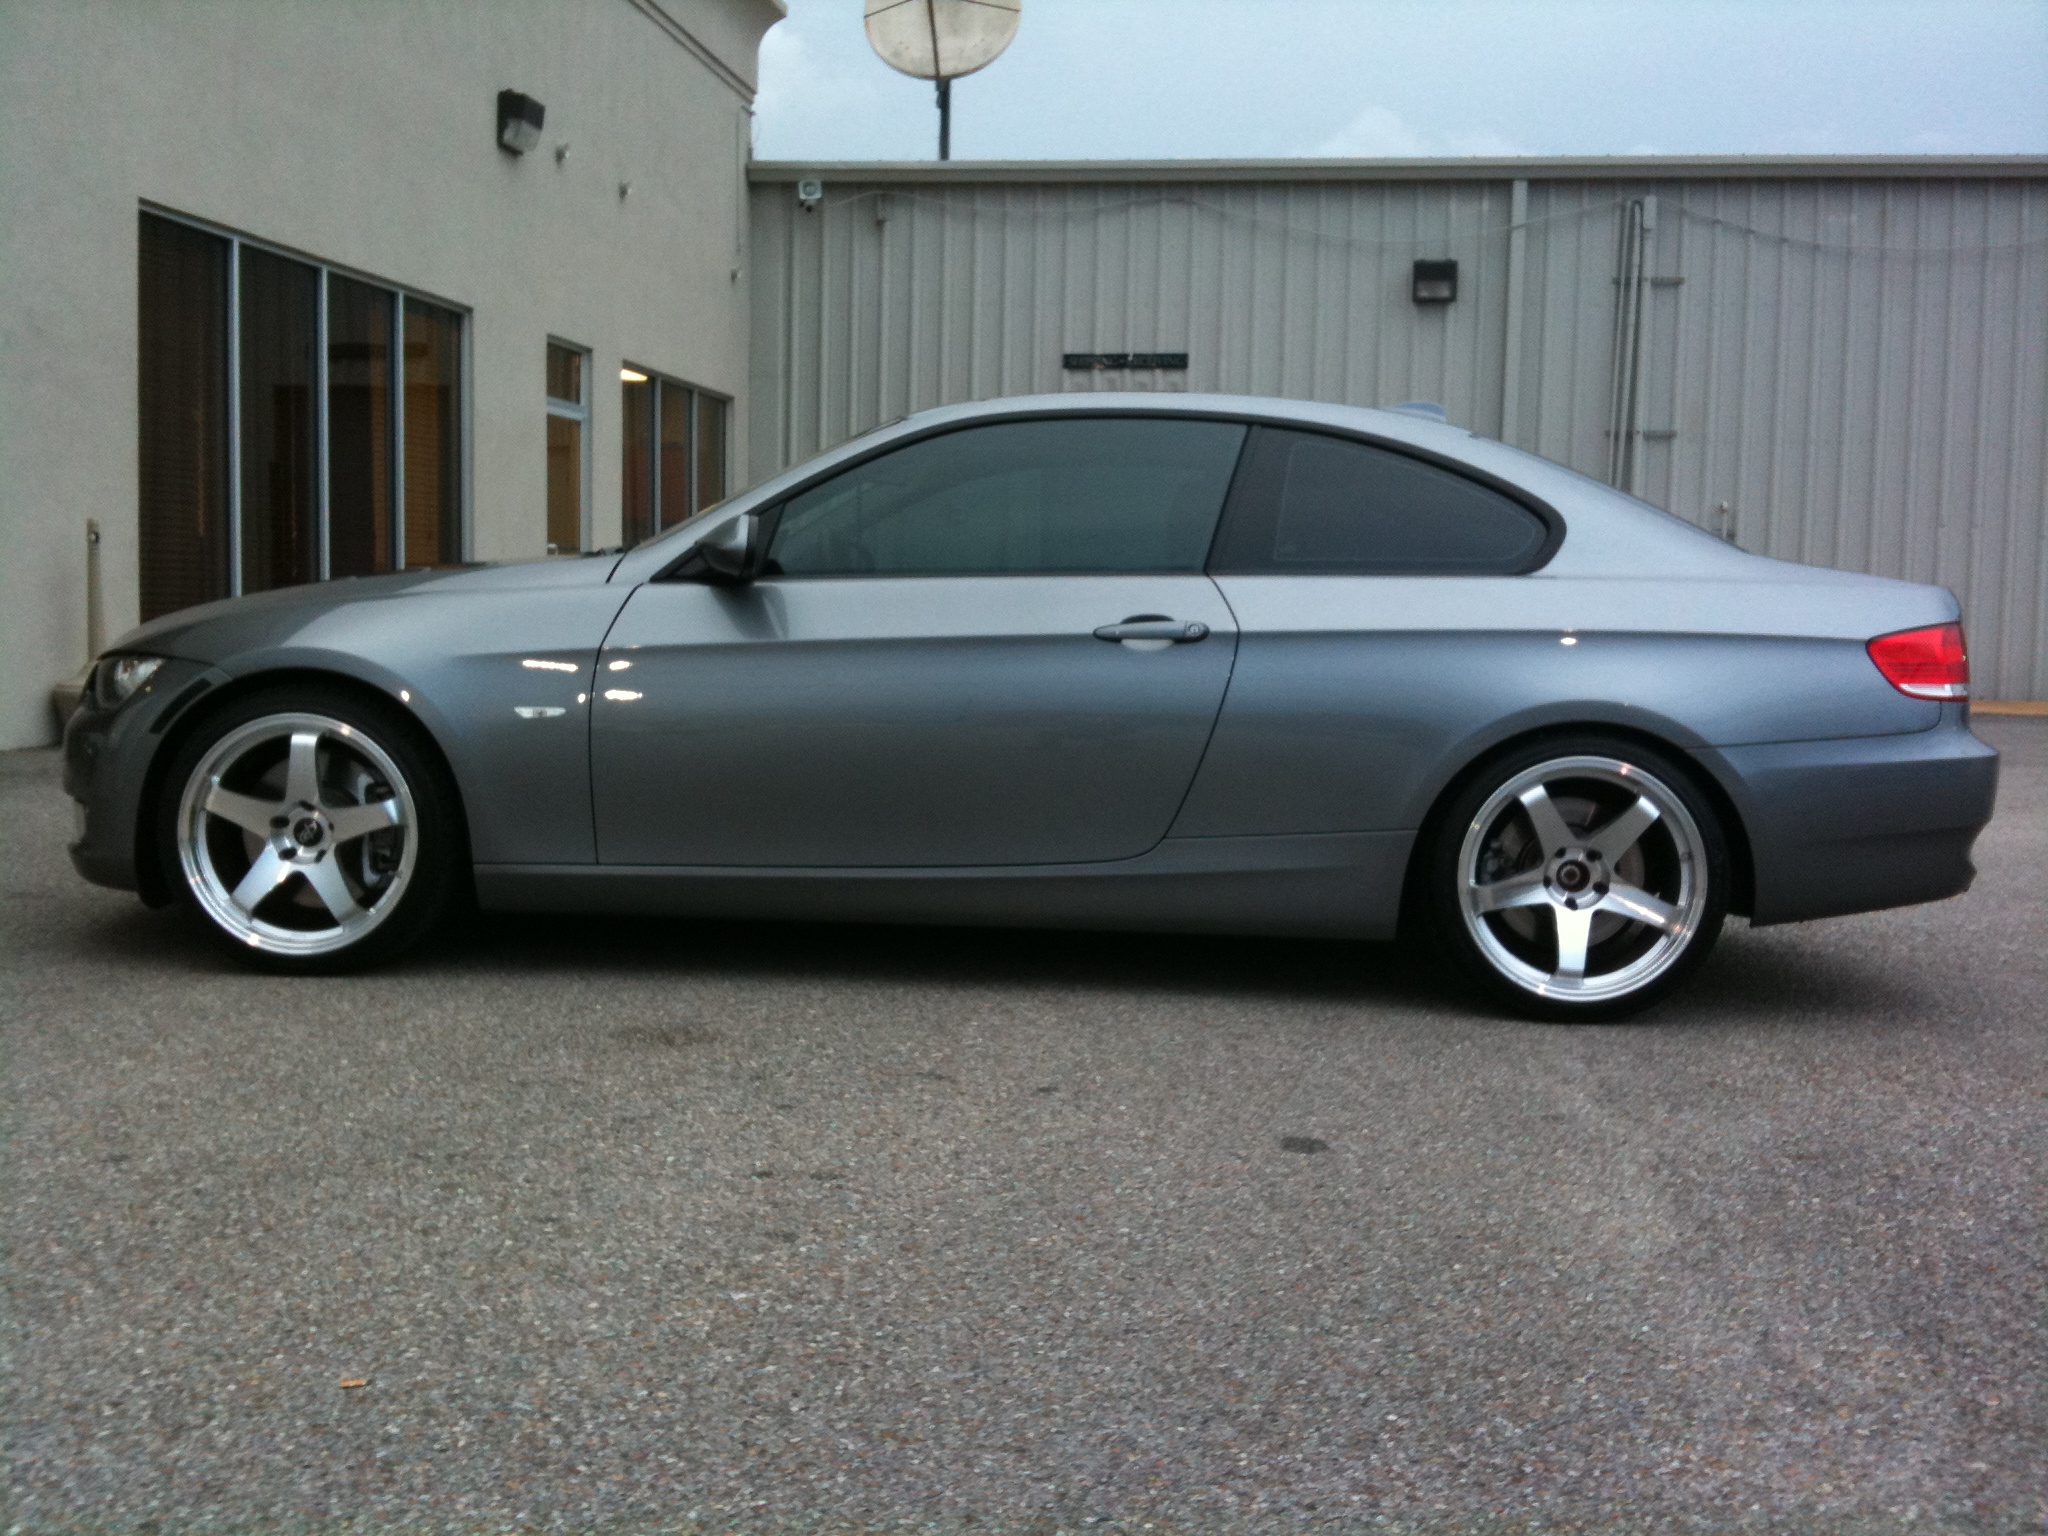 2007 Bmw 335i coupe 0 60 time #7